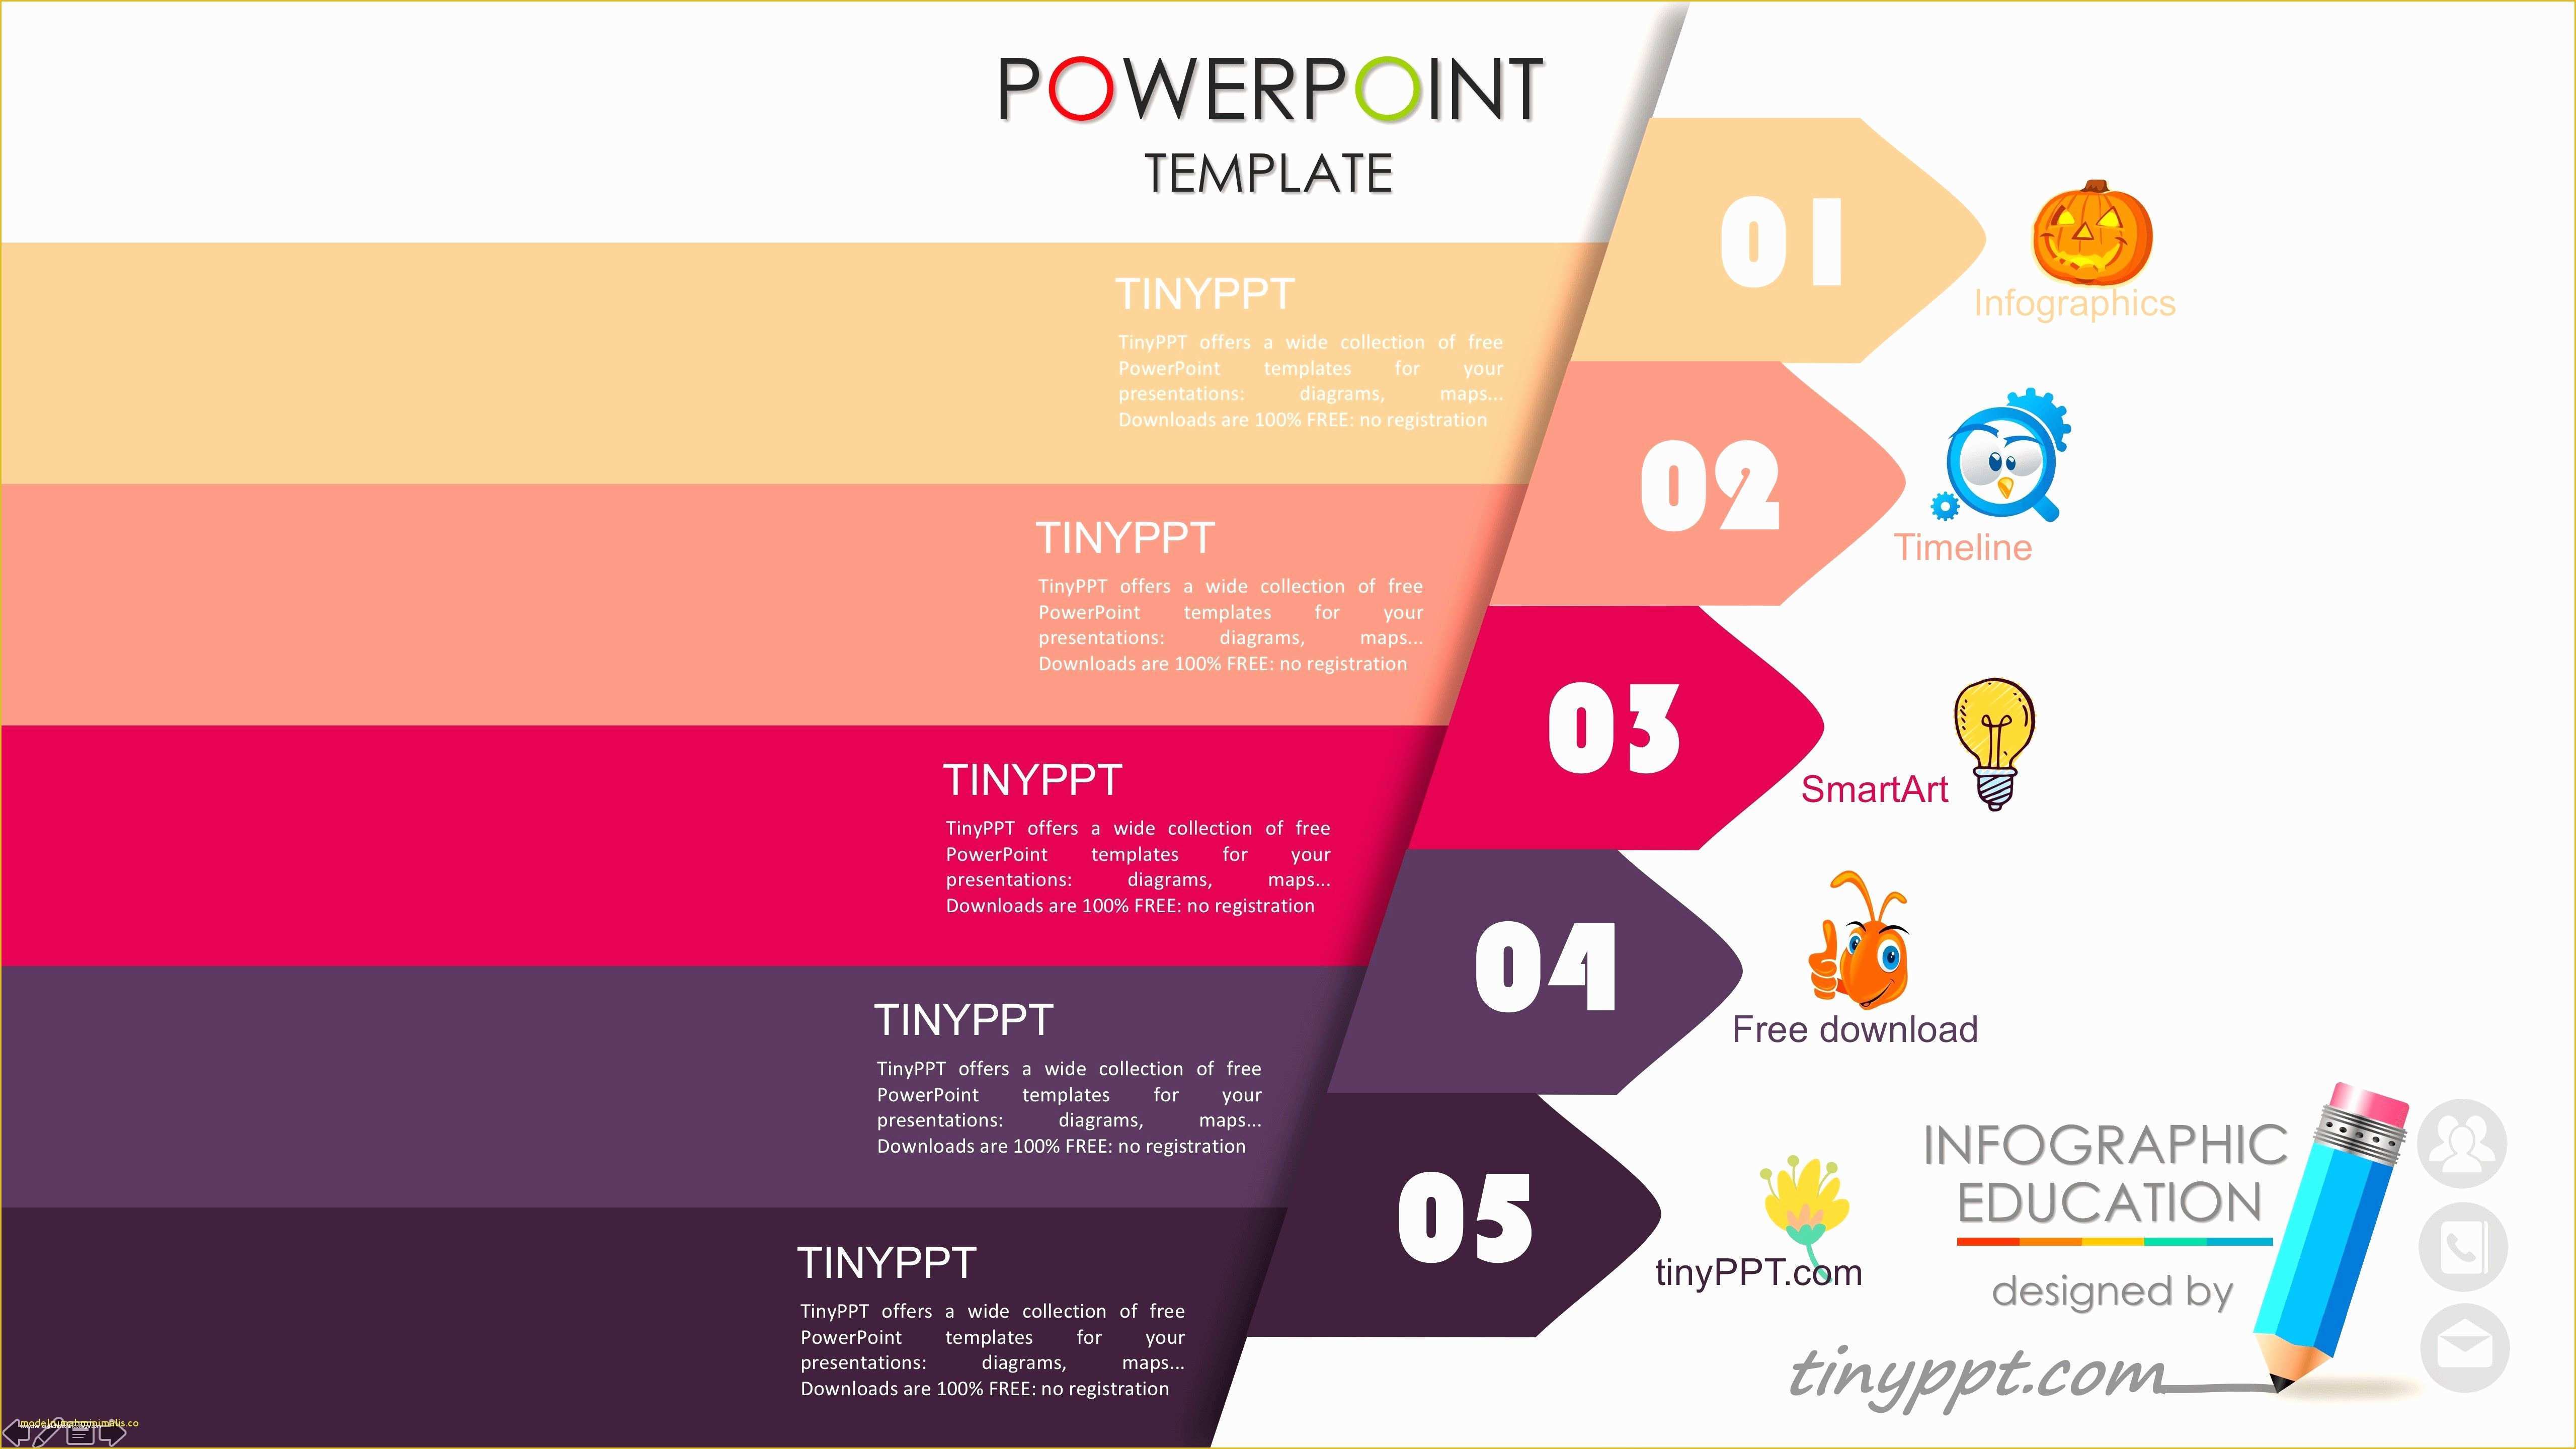 Free Powerpoint Templates for Conference Presentations Of Lovely Awesome Powerpoint Templates Abc